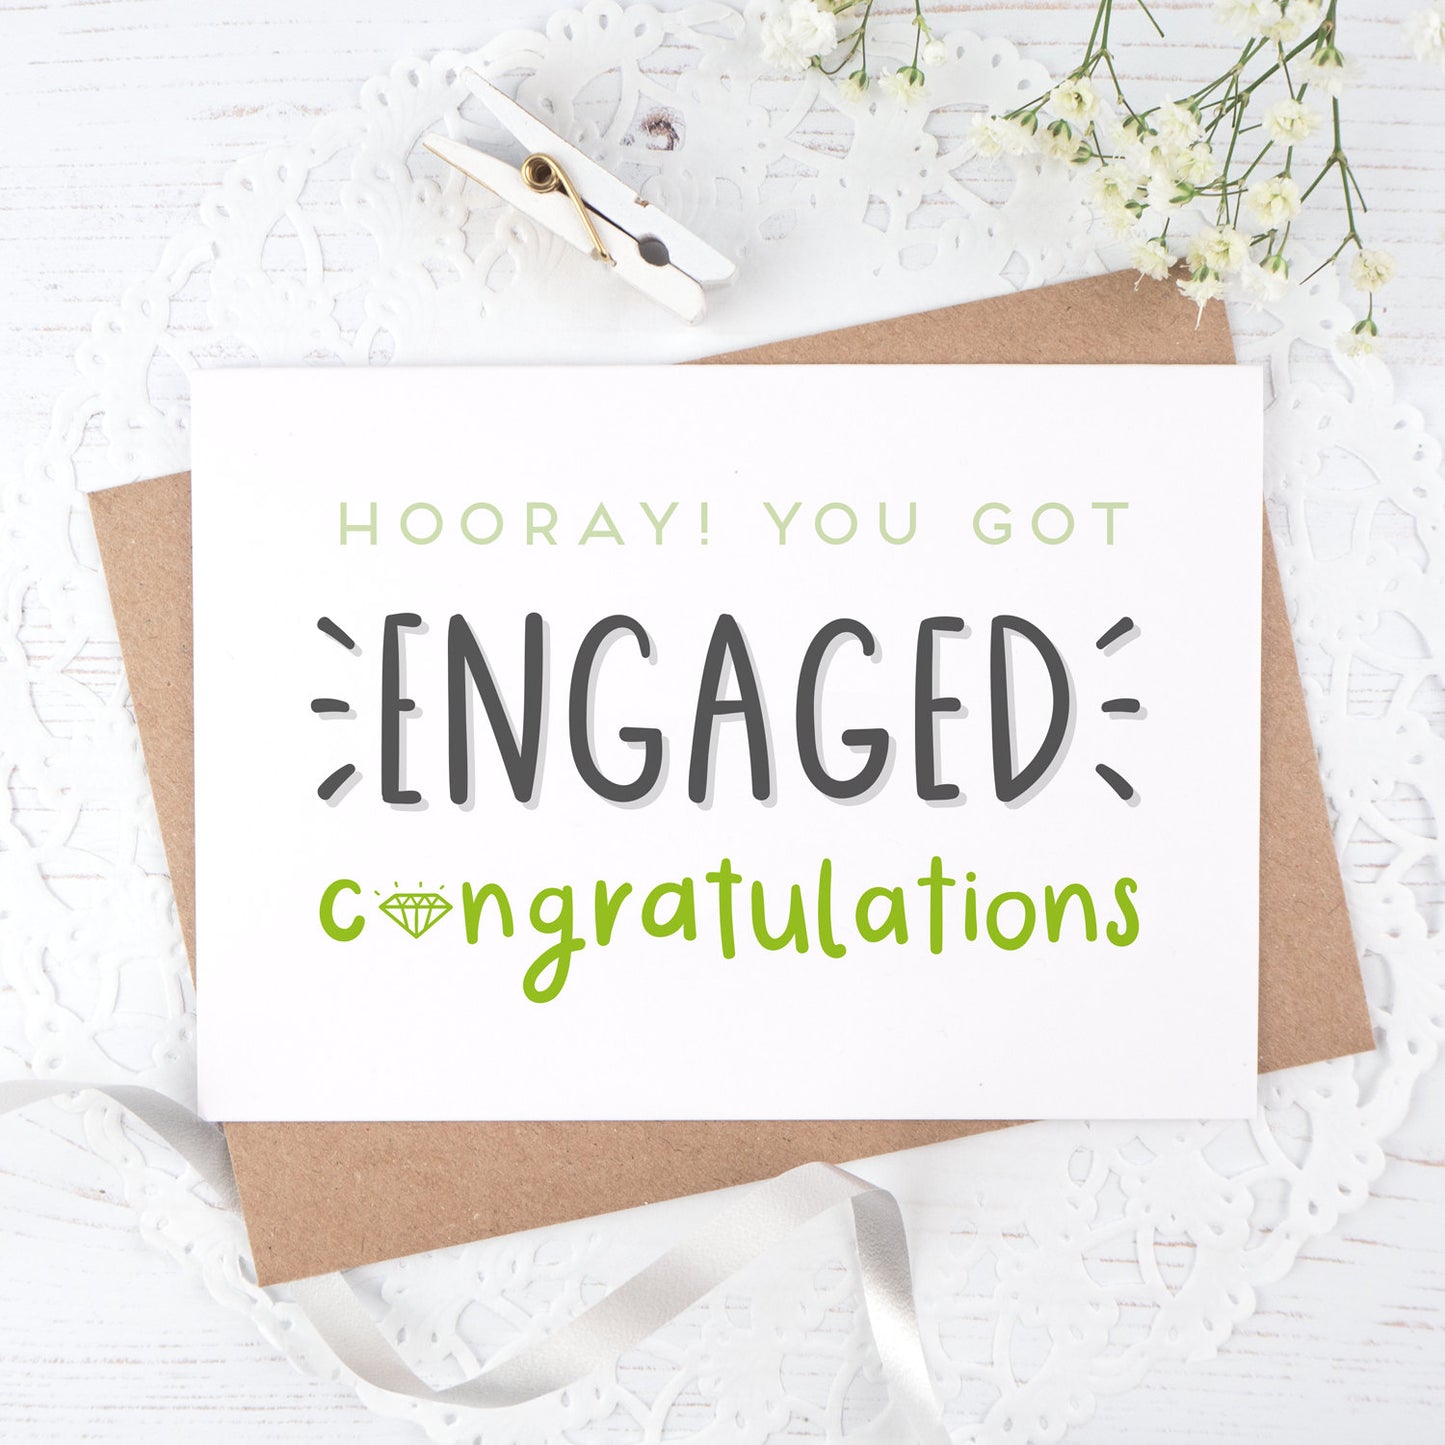 Engagement congratulations card in green